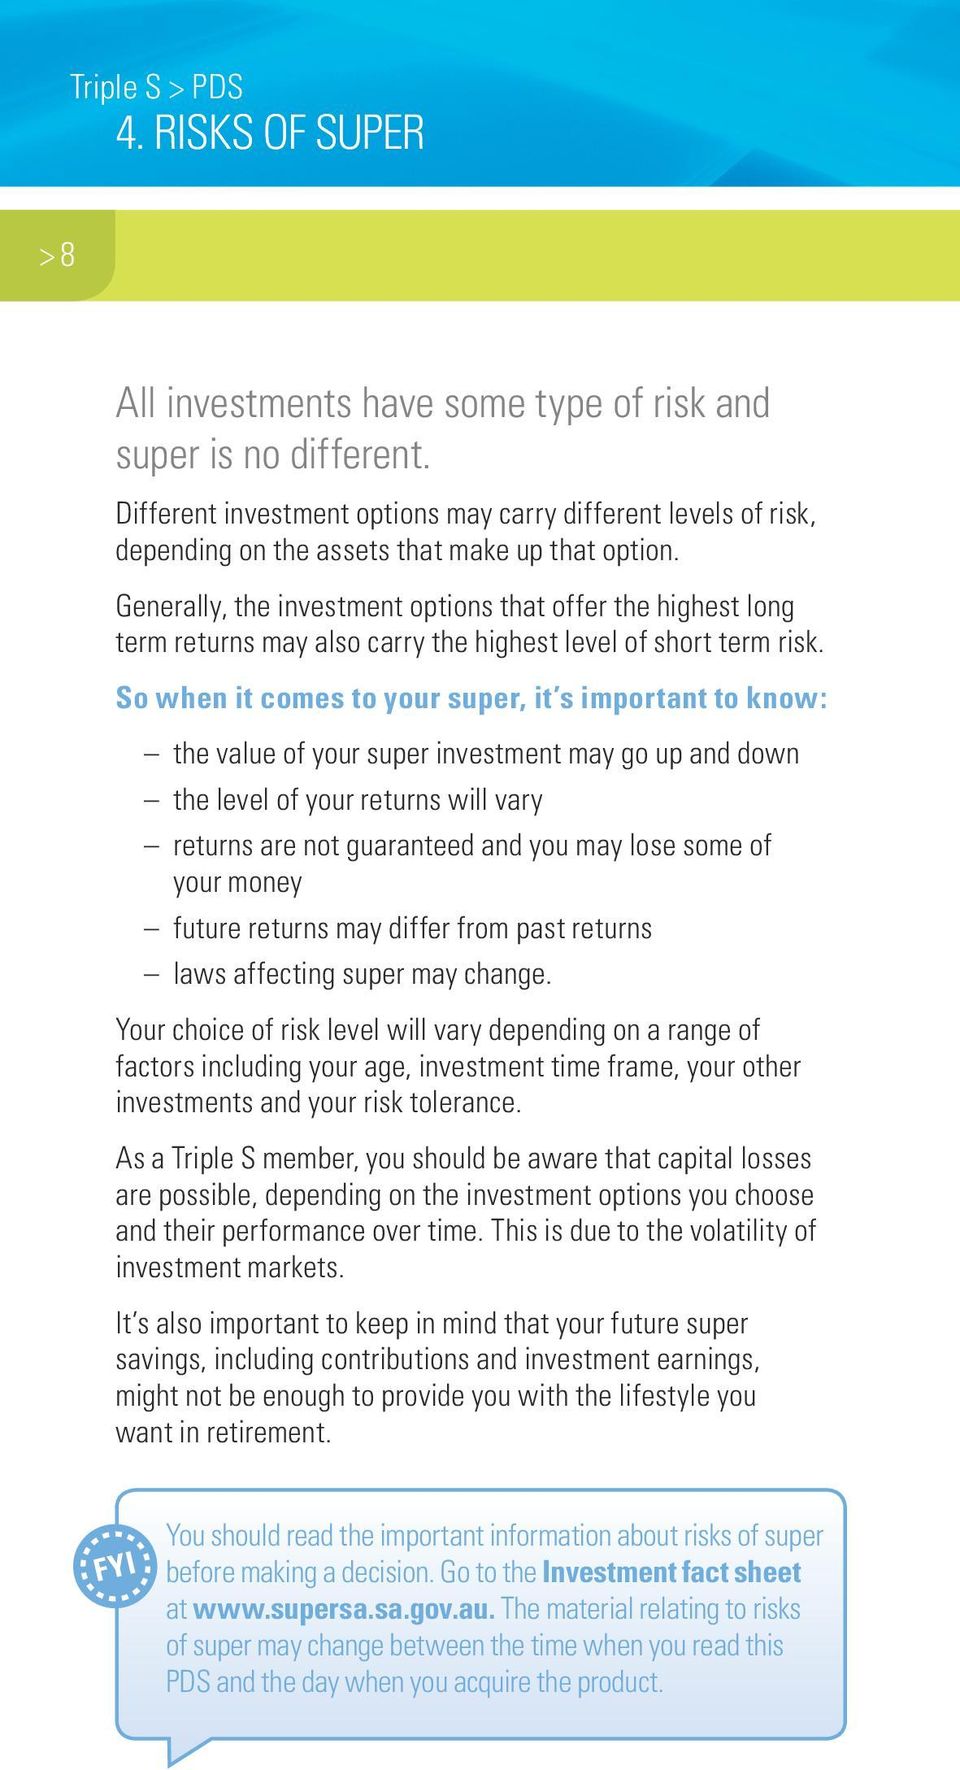 Generally, the investment options that offer the highest long term returns may also carry the highest level of short term risk.